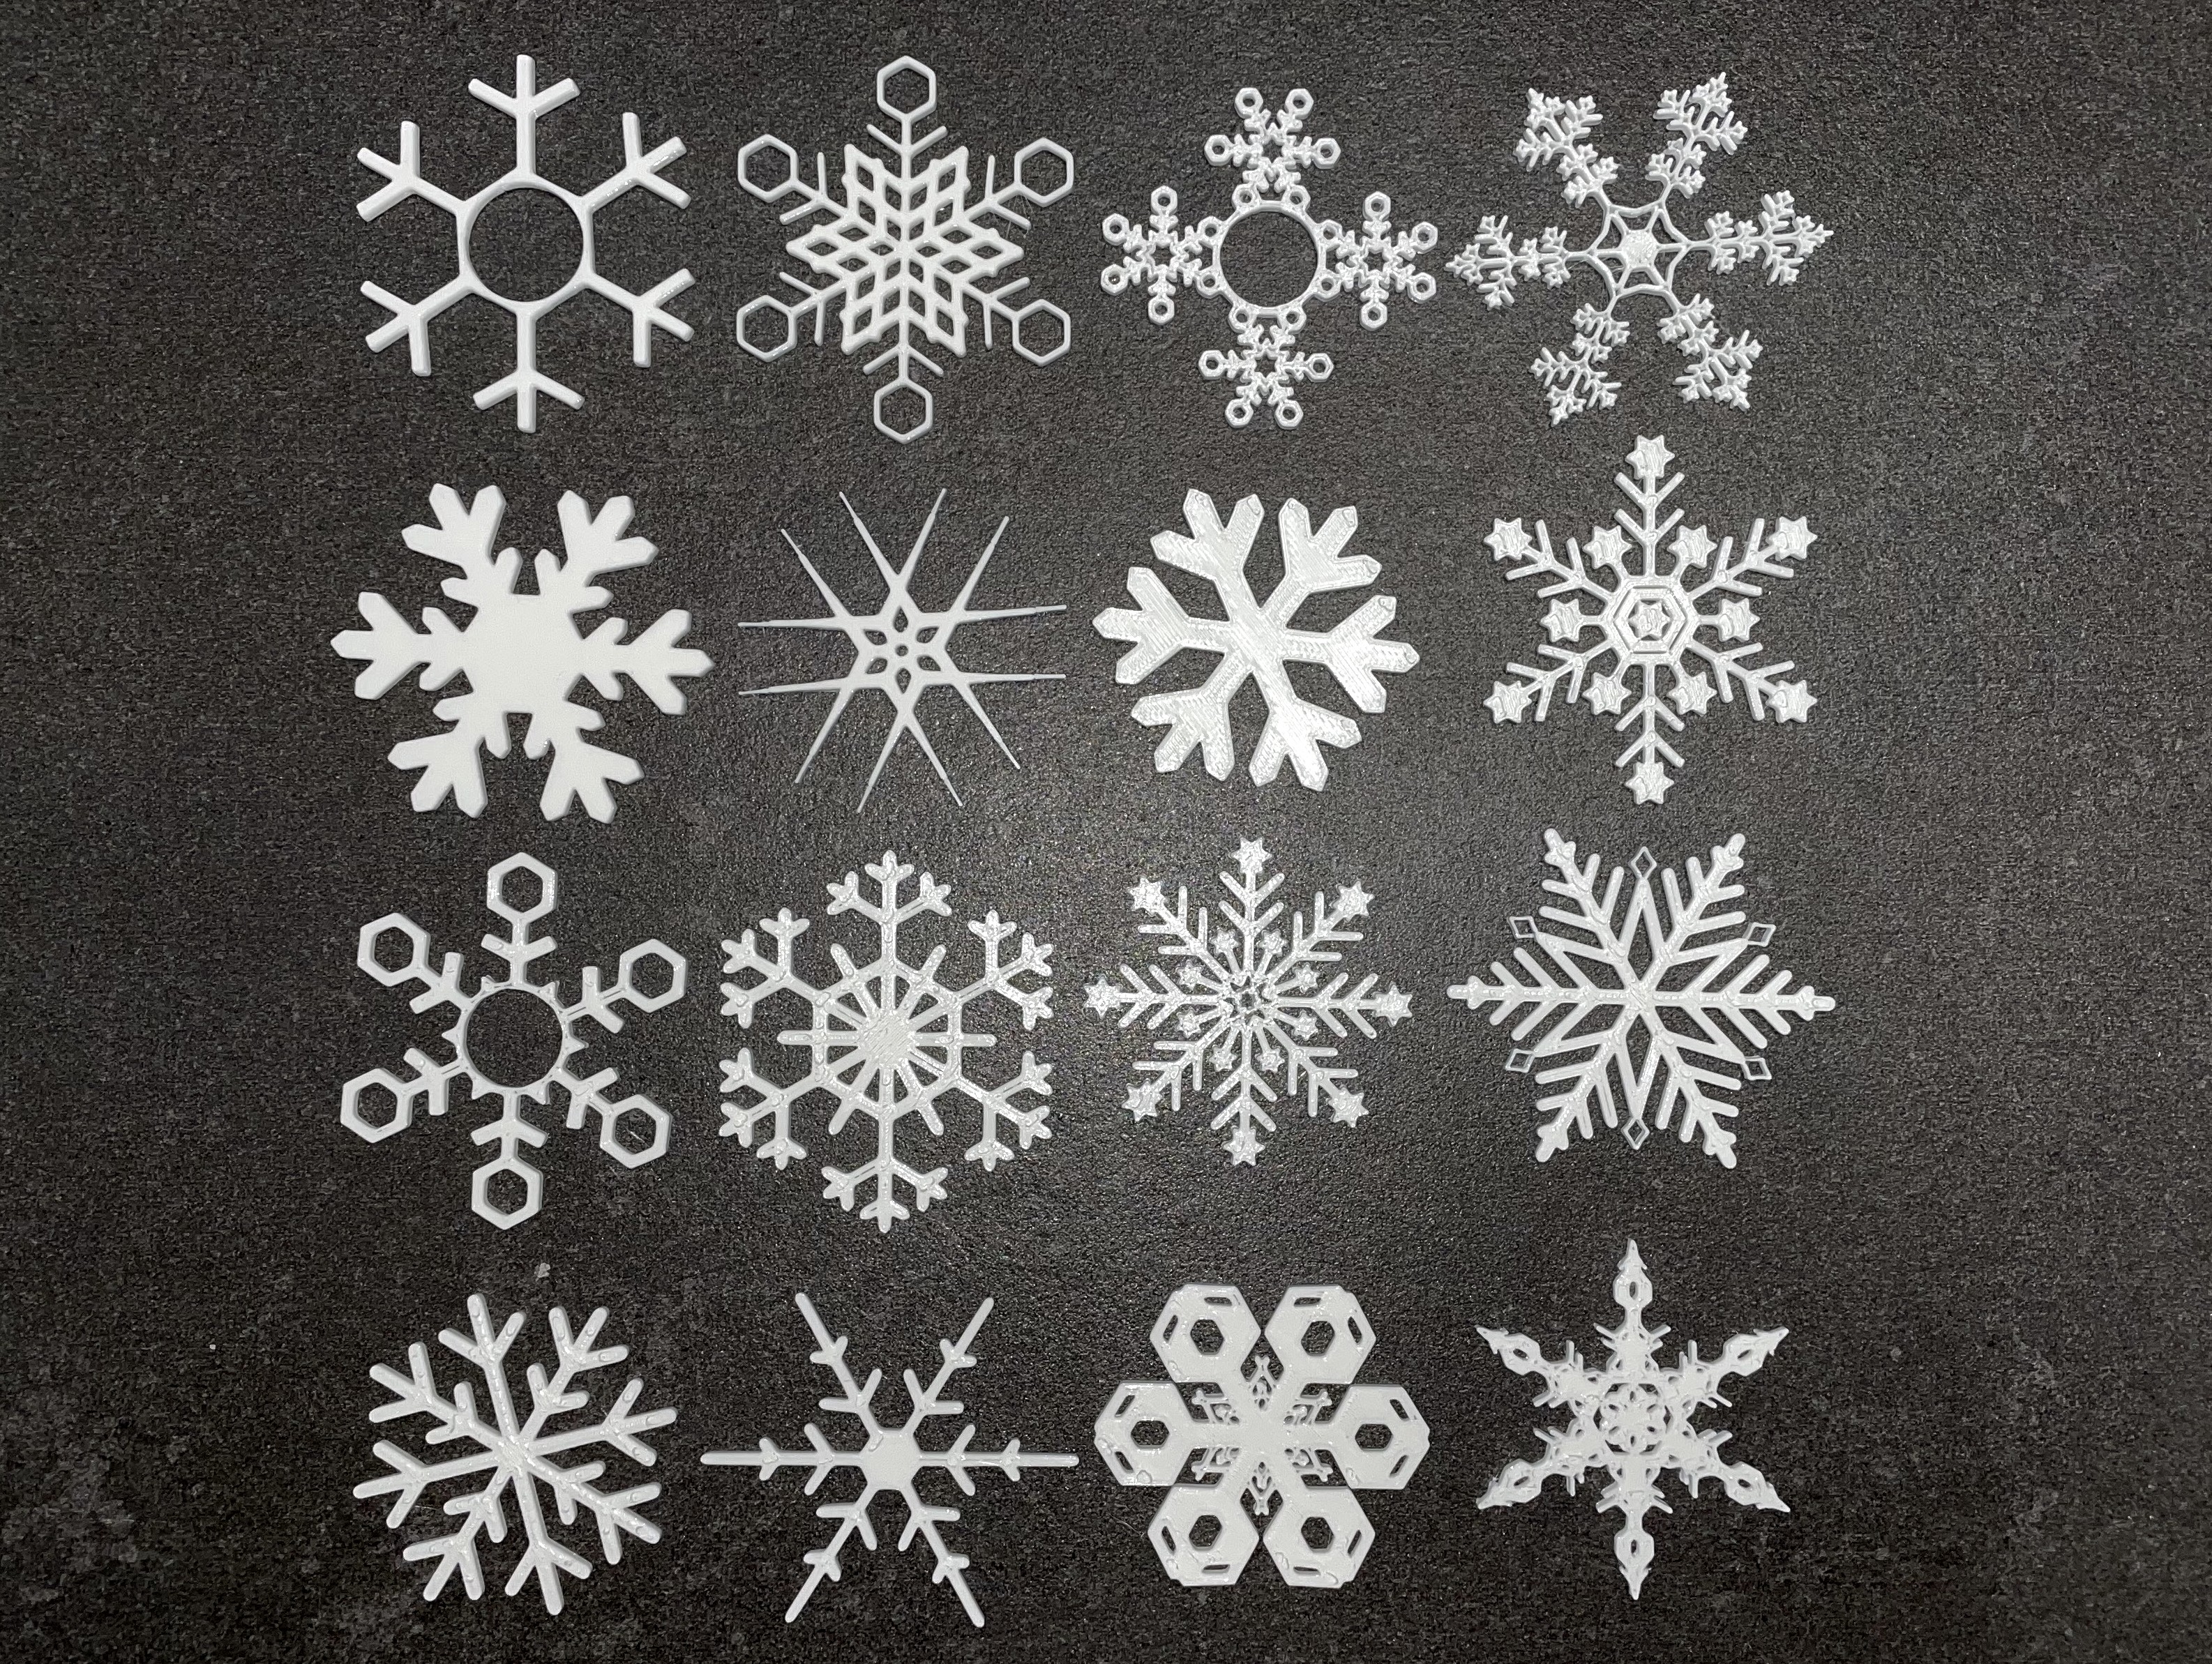 Novel Merk Winter Snowflake Miniature Snow Themed Arts and Crafts Wood Cut Out Embellishments Silver & White Snow Flakes (18 Pieces), White & Silver